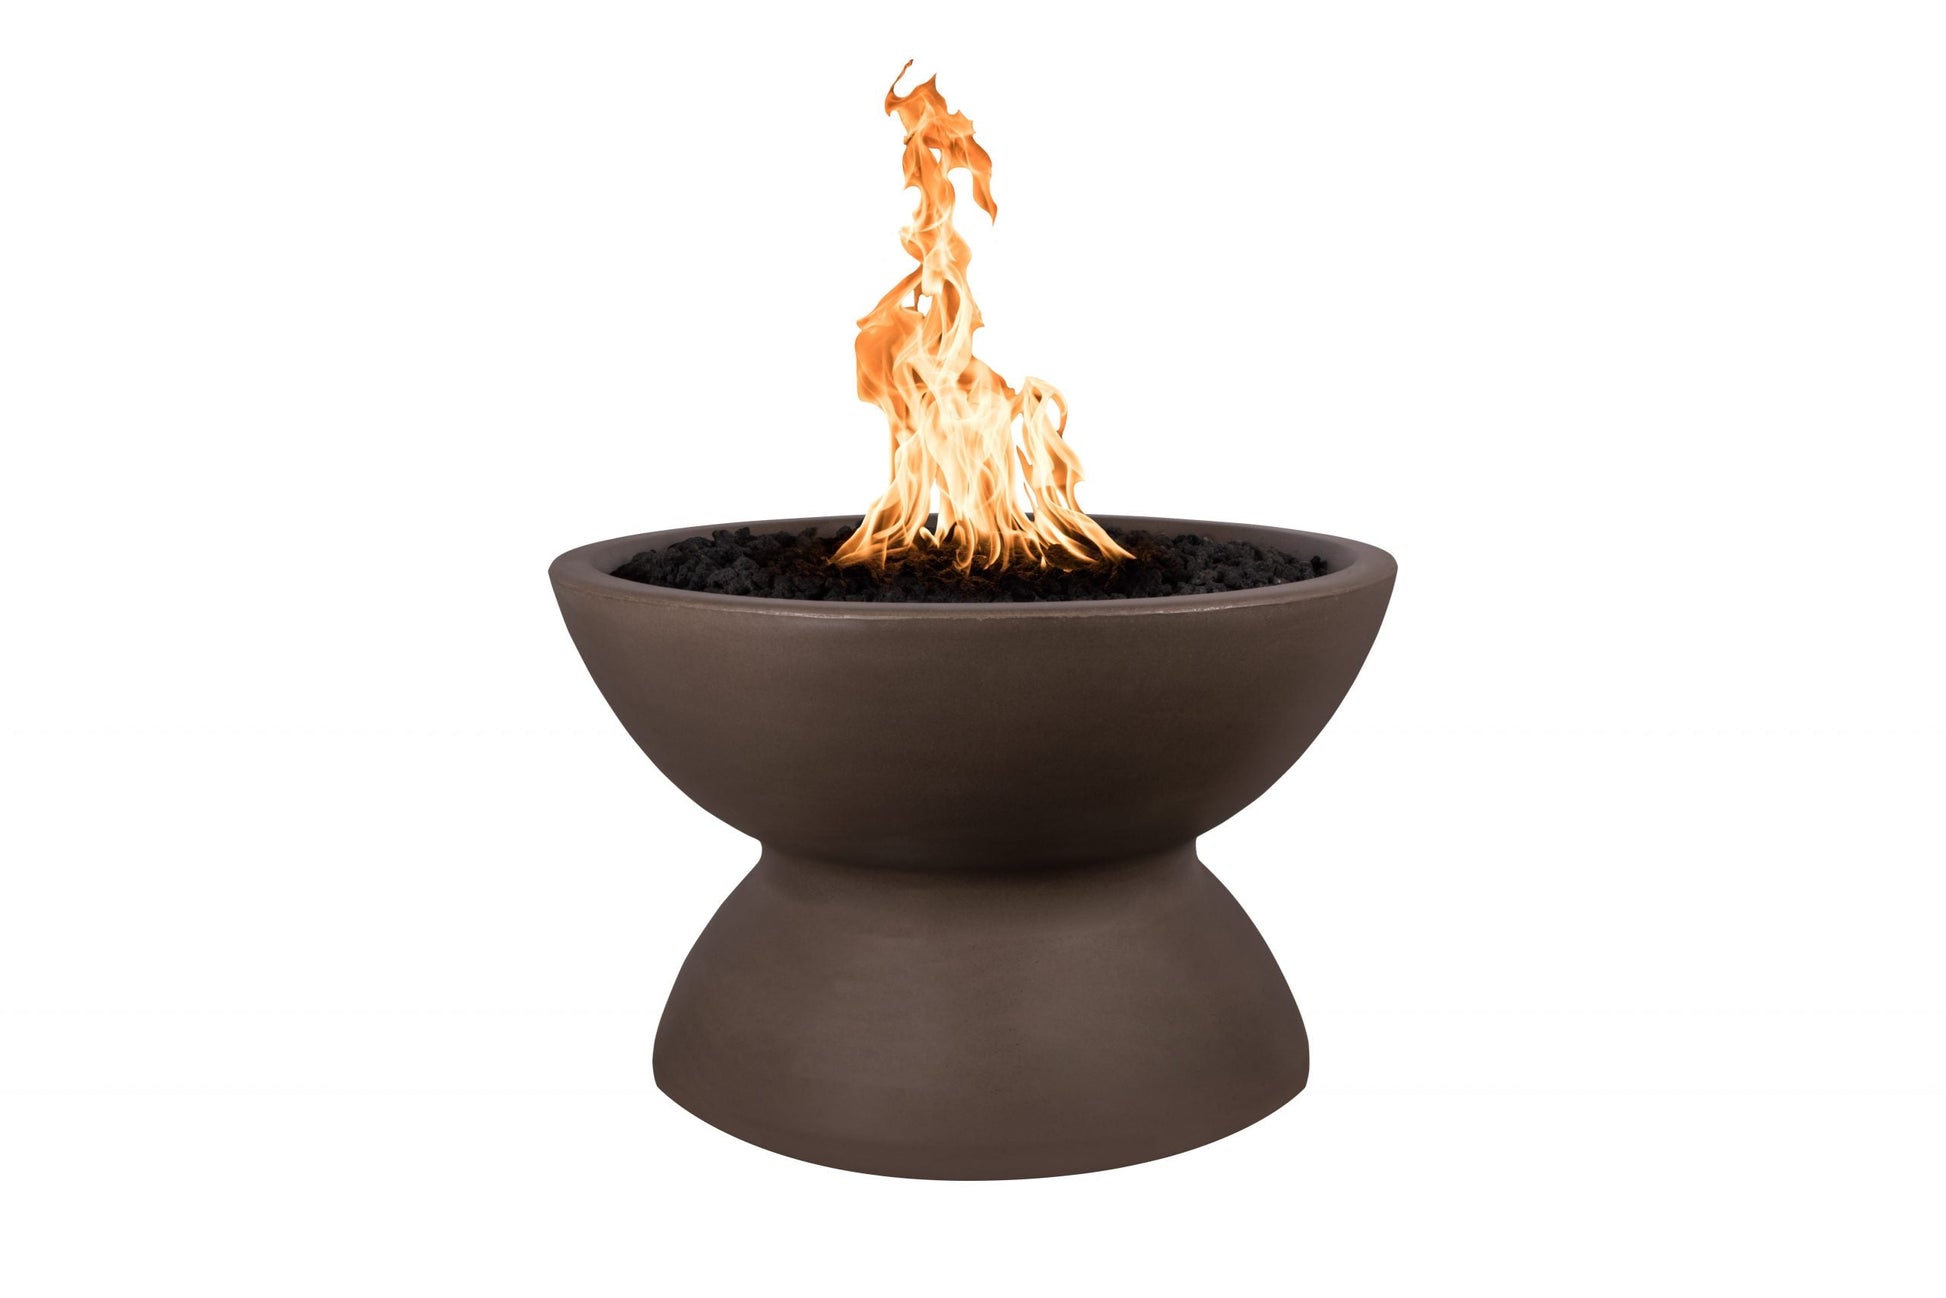 The Outdoor Plus Round Copa 33" Metallic Copper GFRC Concrete Liquid Propane Fire Pit with 12V Electronic Ignition